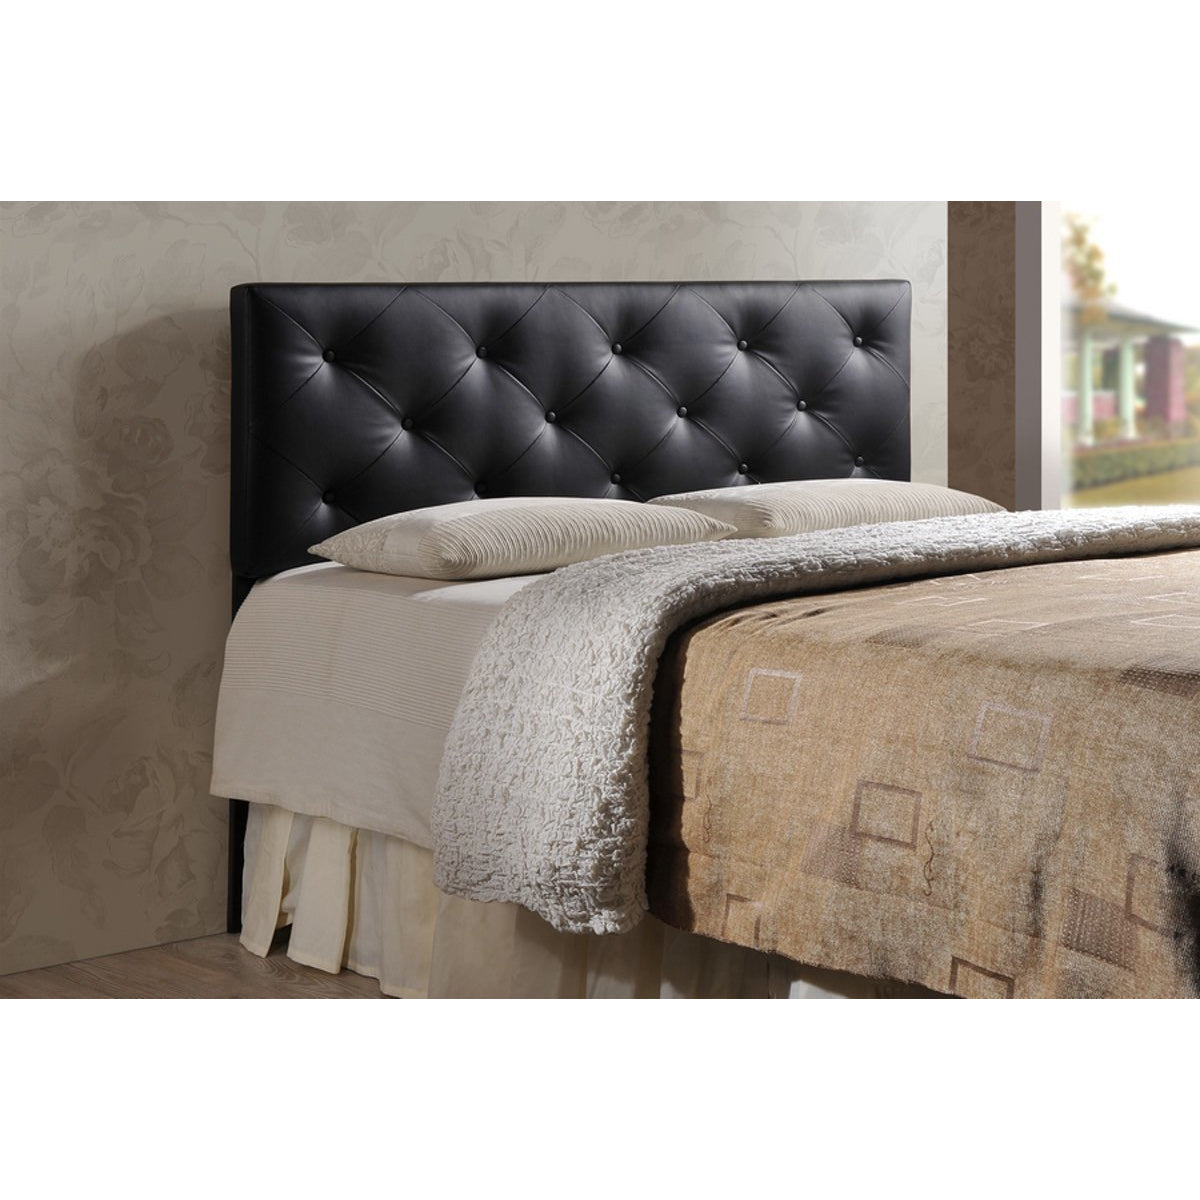 Baxton Studio Baltimore Modern and Contemporary Queen Black Faux Leather Upholstered Headboard Baxton Studio-Headboards-Minimal And Modern - 1